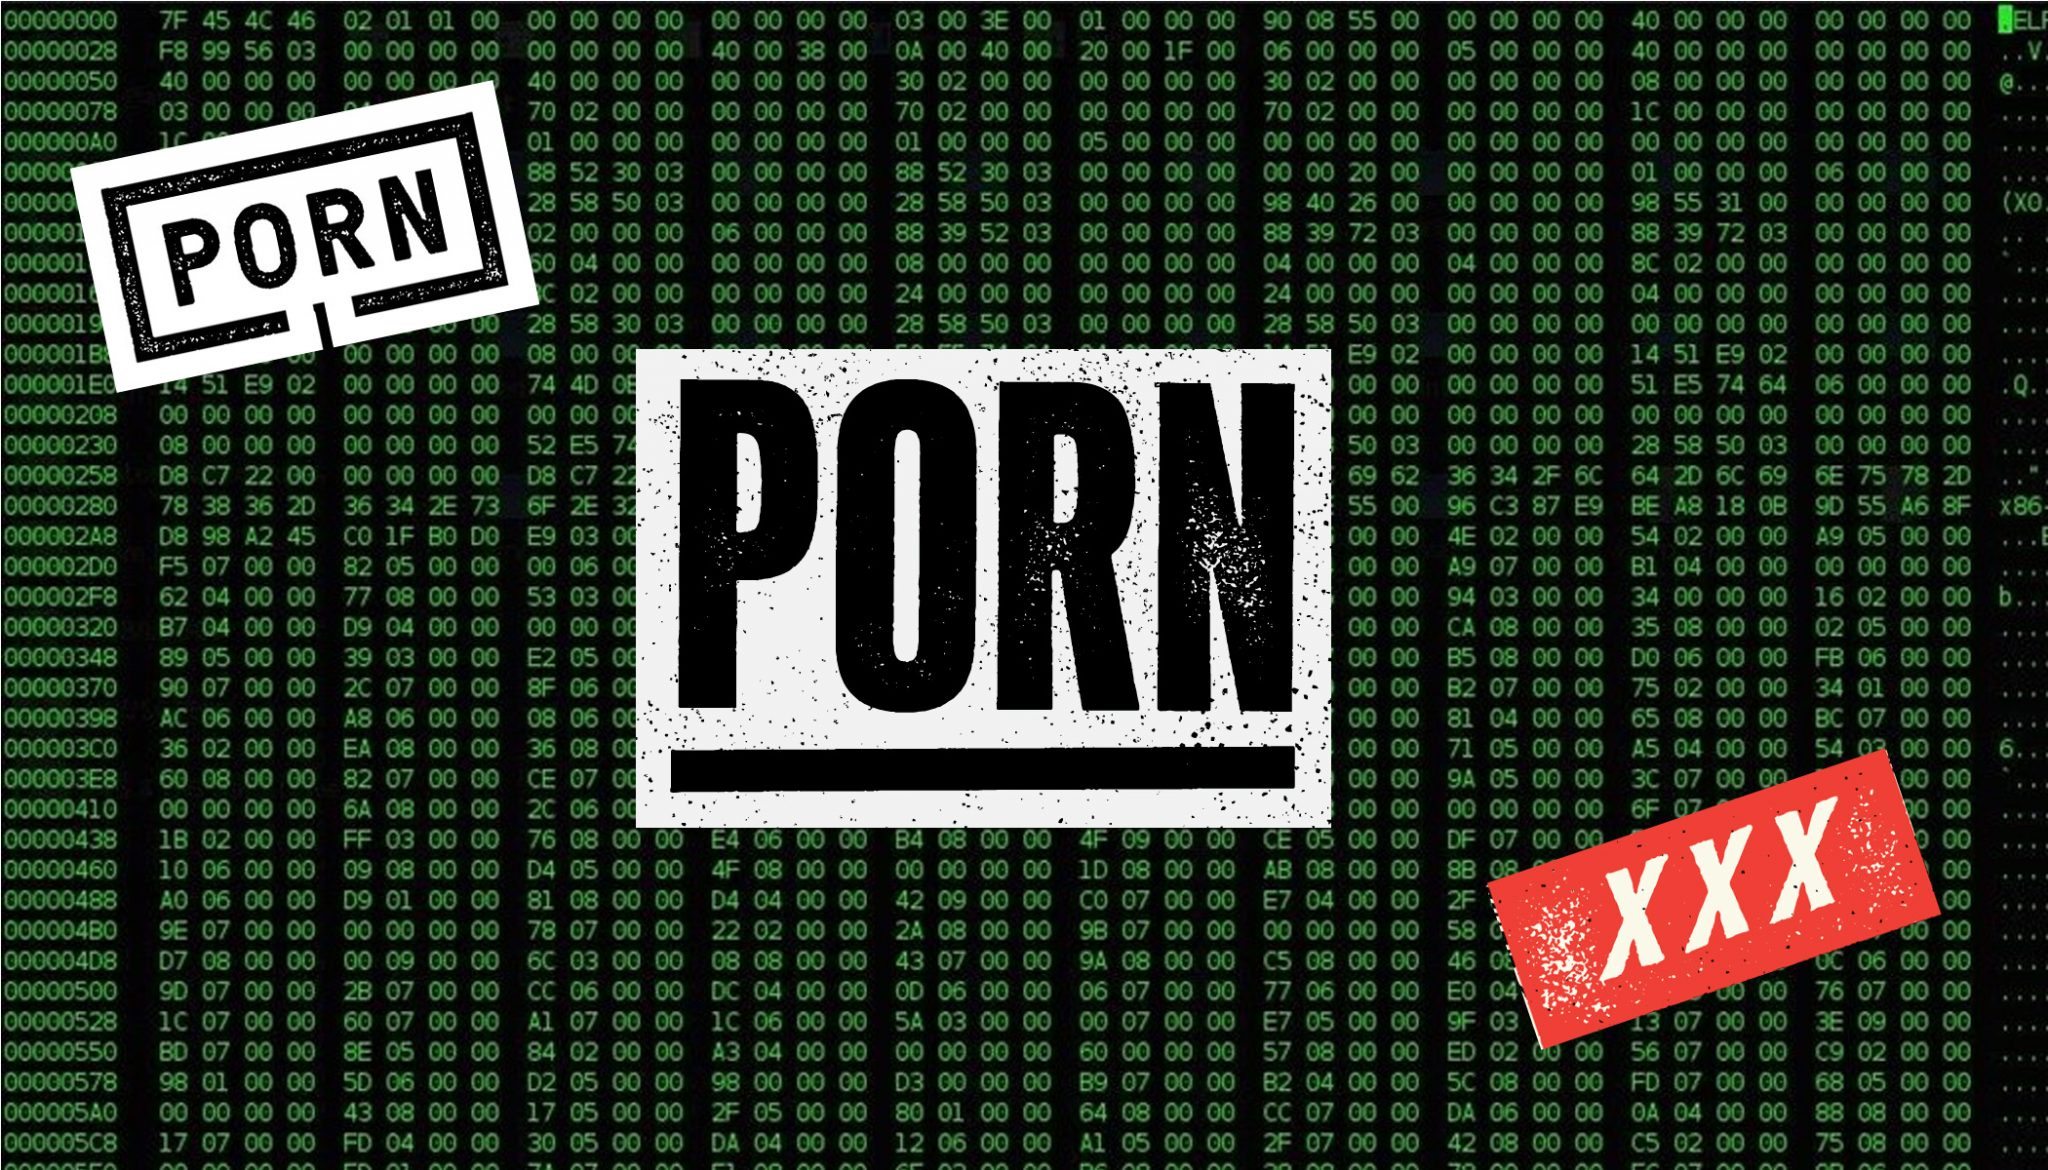 Over 30 Porn Sites - Porn Site Hacked: 800,000 User Names And Emails Released